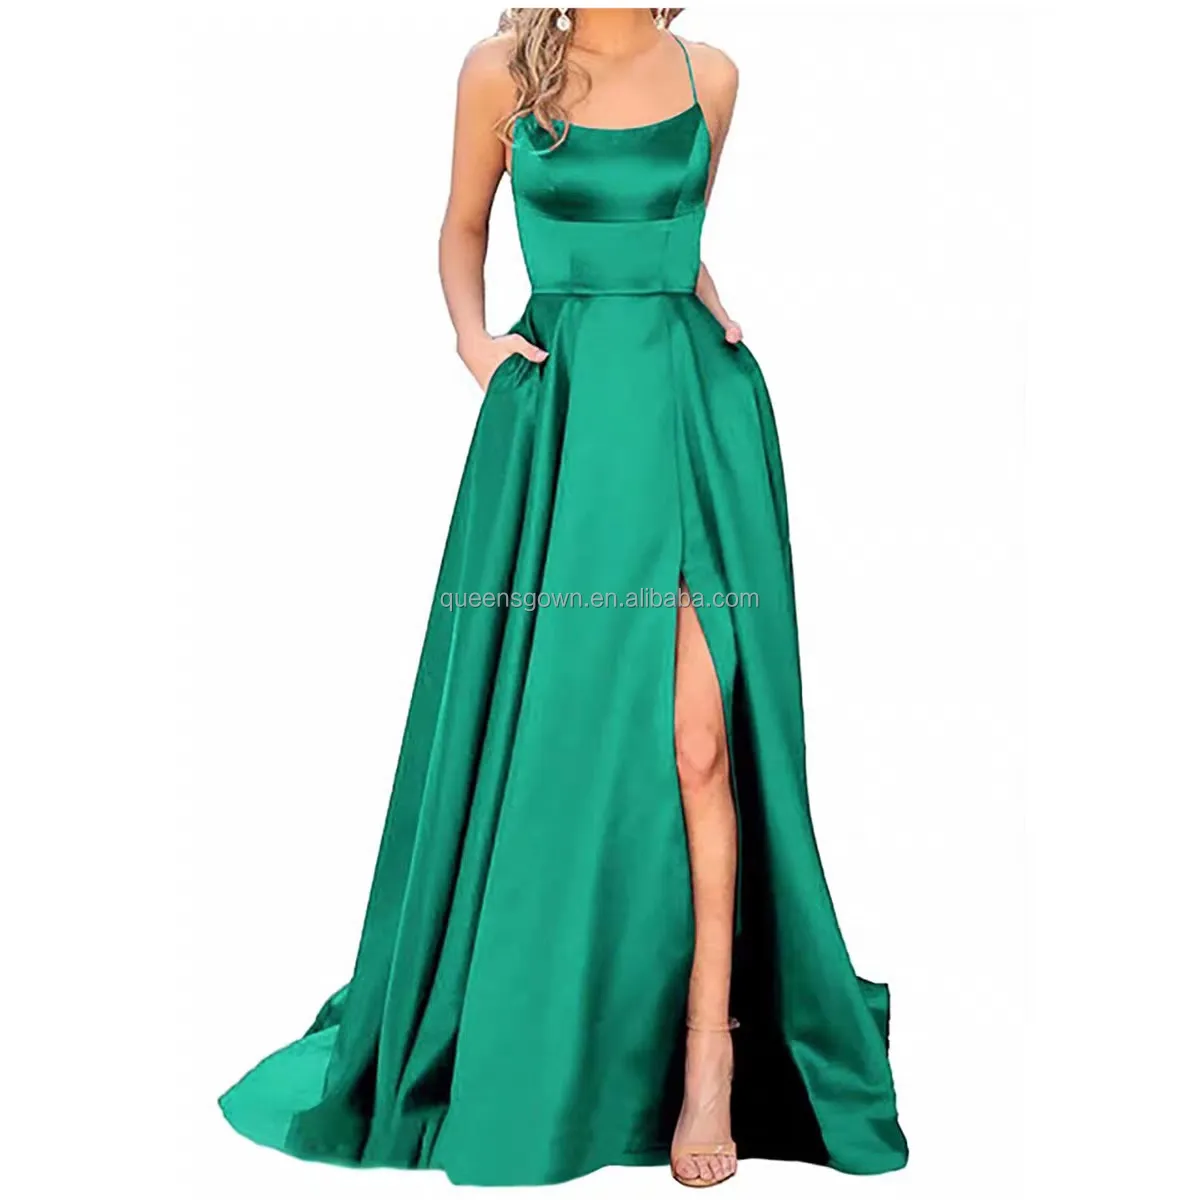 QUEENSGOWN lake green high split prom dress mermaid sexy backless party dress multi-colour